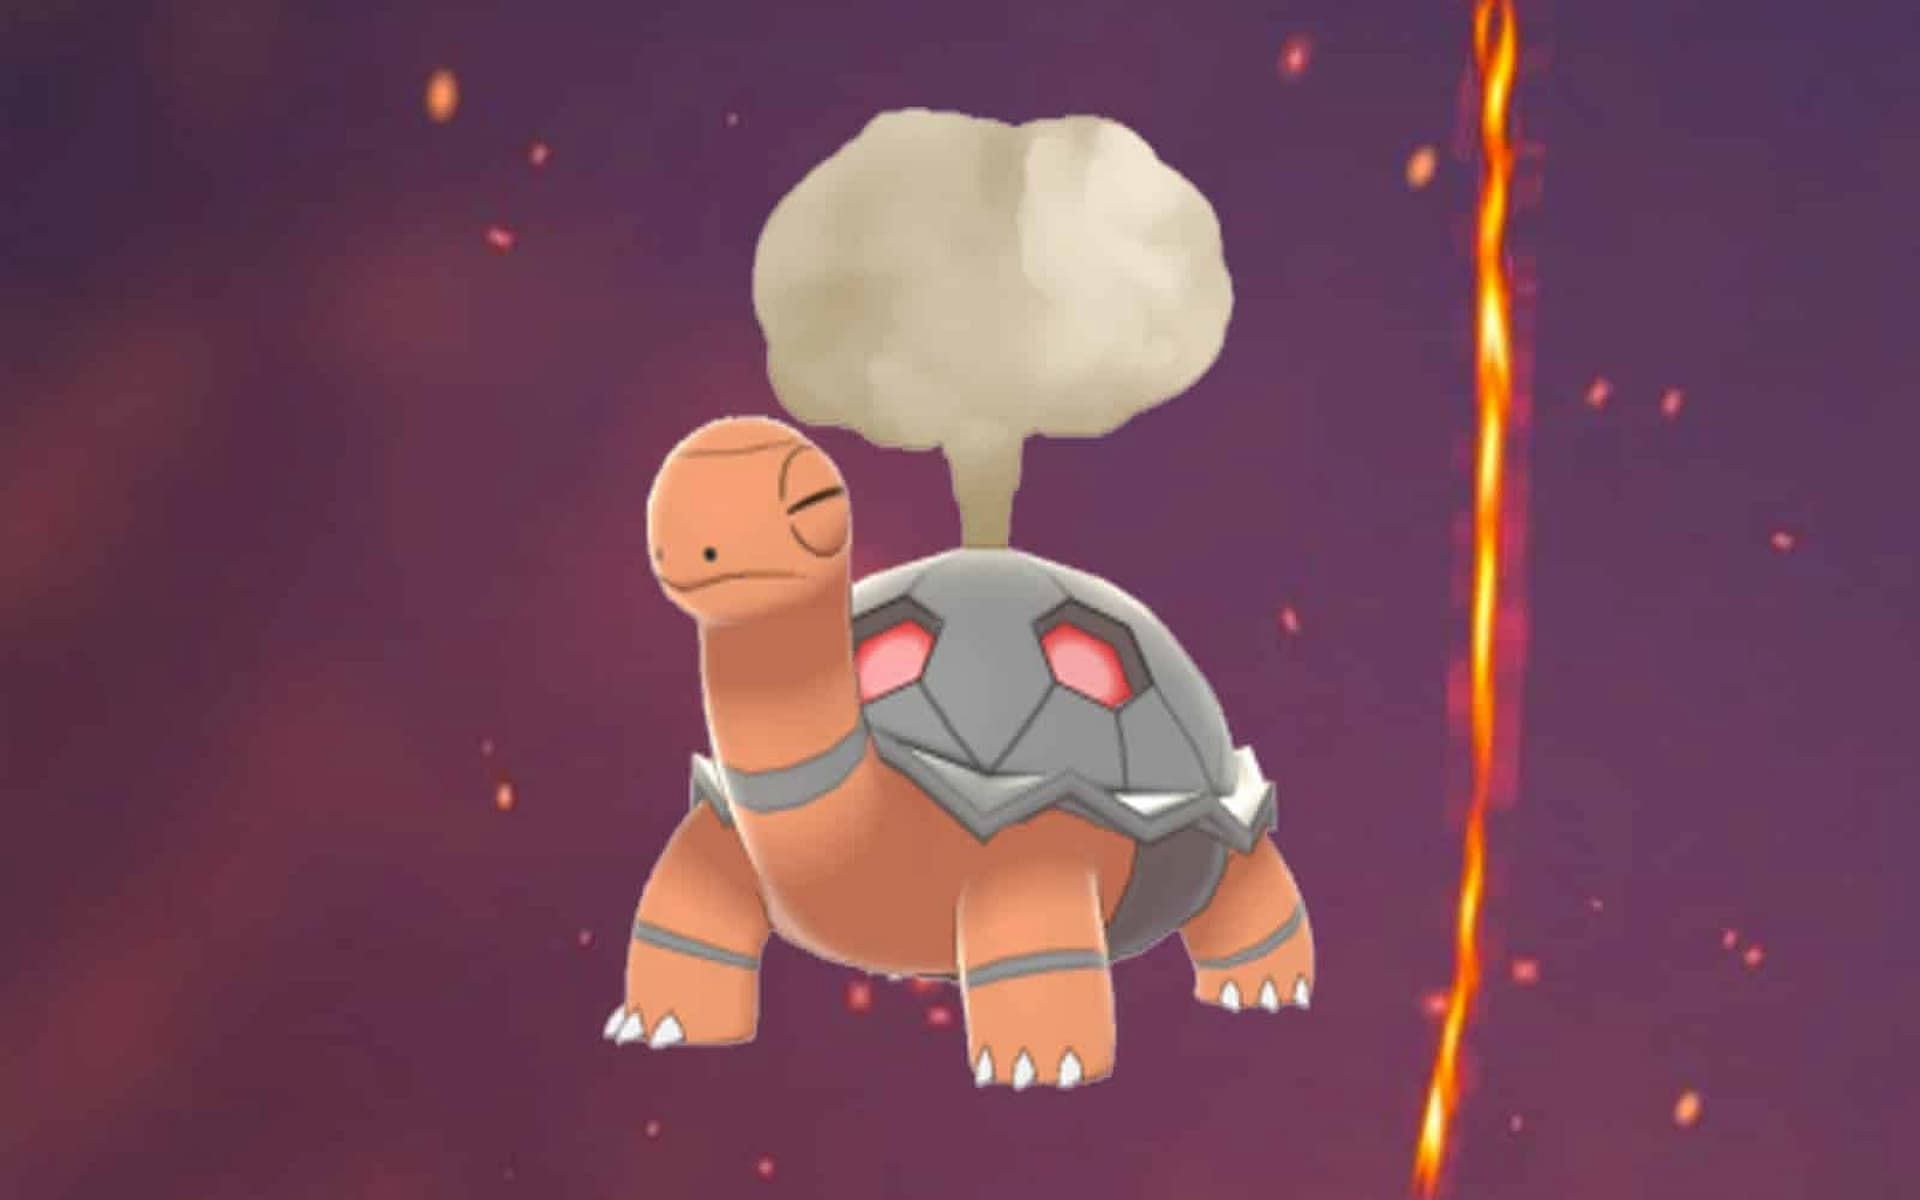 Torkoal is quite powerful for such a small Pokemon (Image via Game Freak)